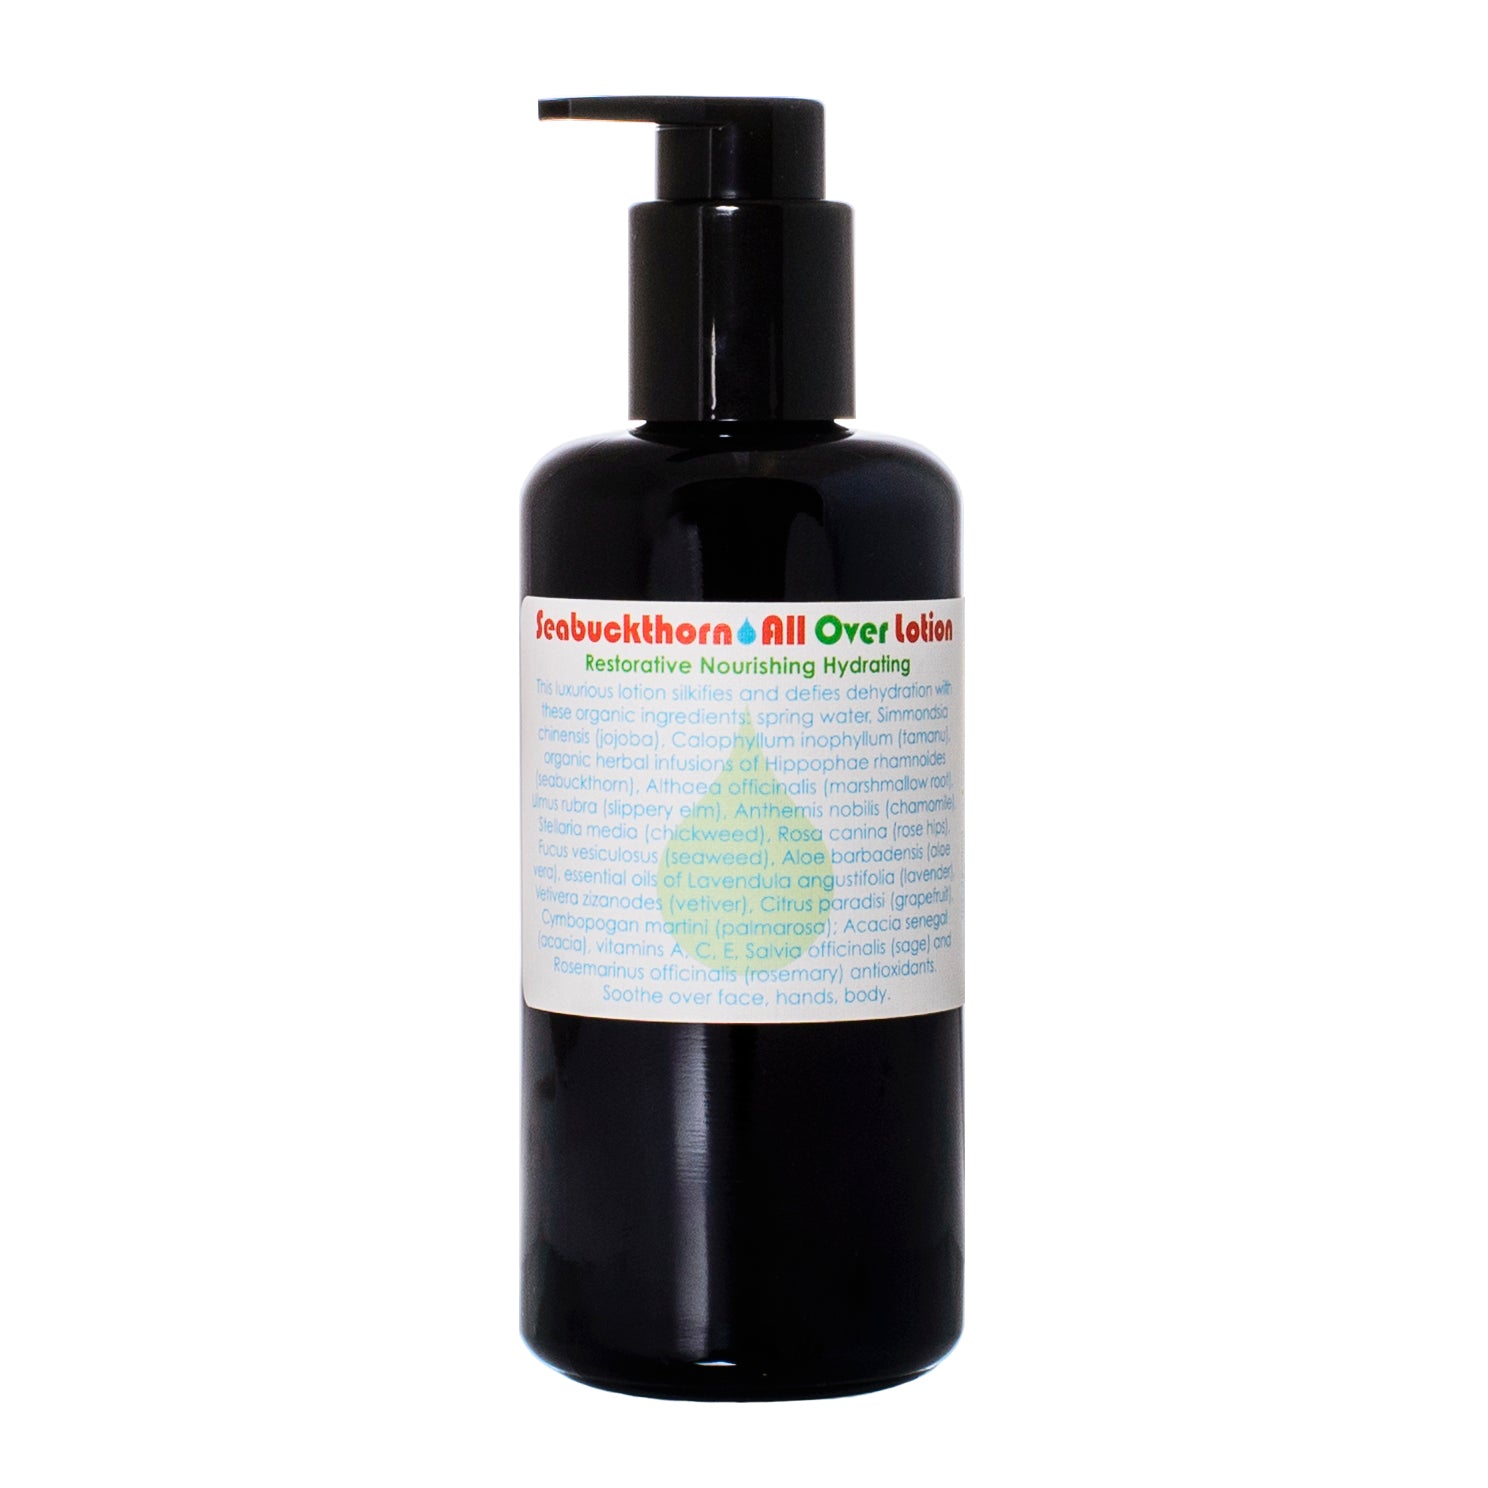 NEW! Seabuckthorn All Over Lotion, 200ml